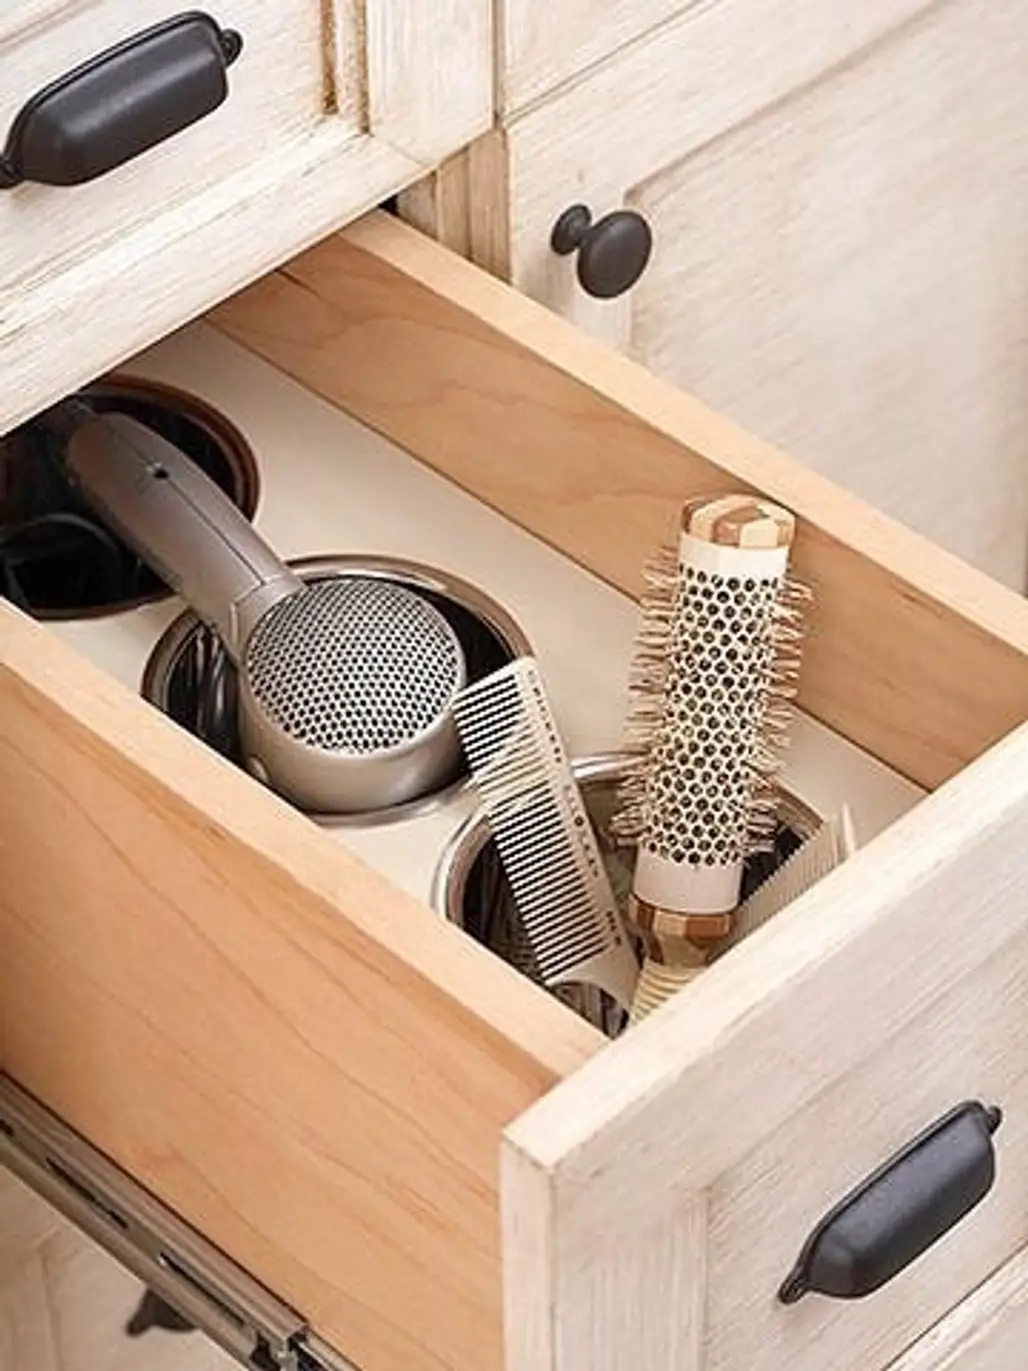 With the Use of a Piece of Wood and Several Bins You Can Customize a Drawer